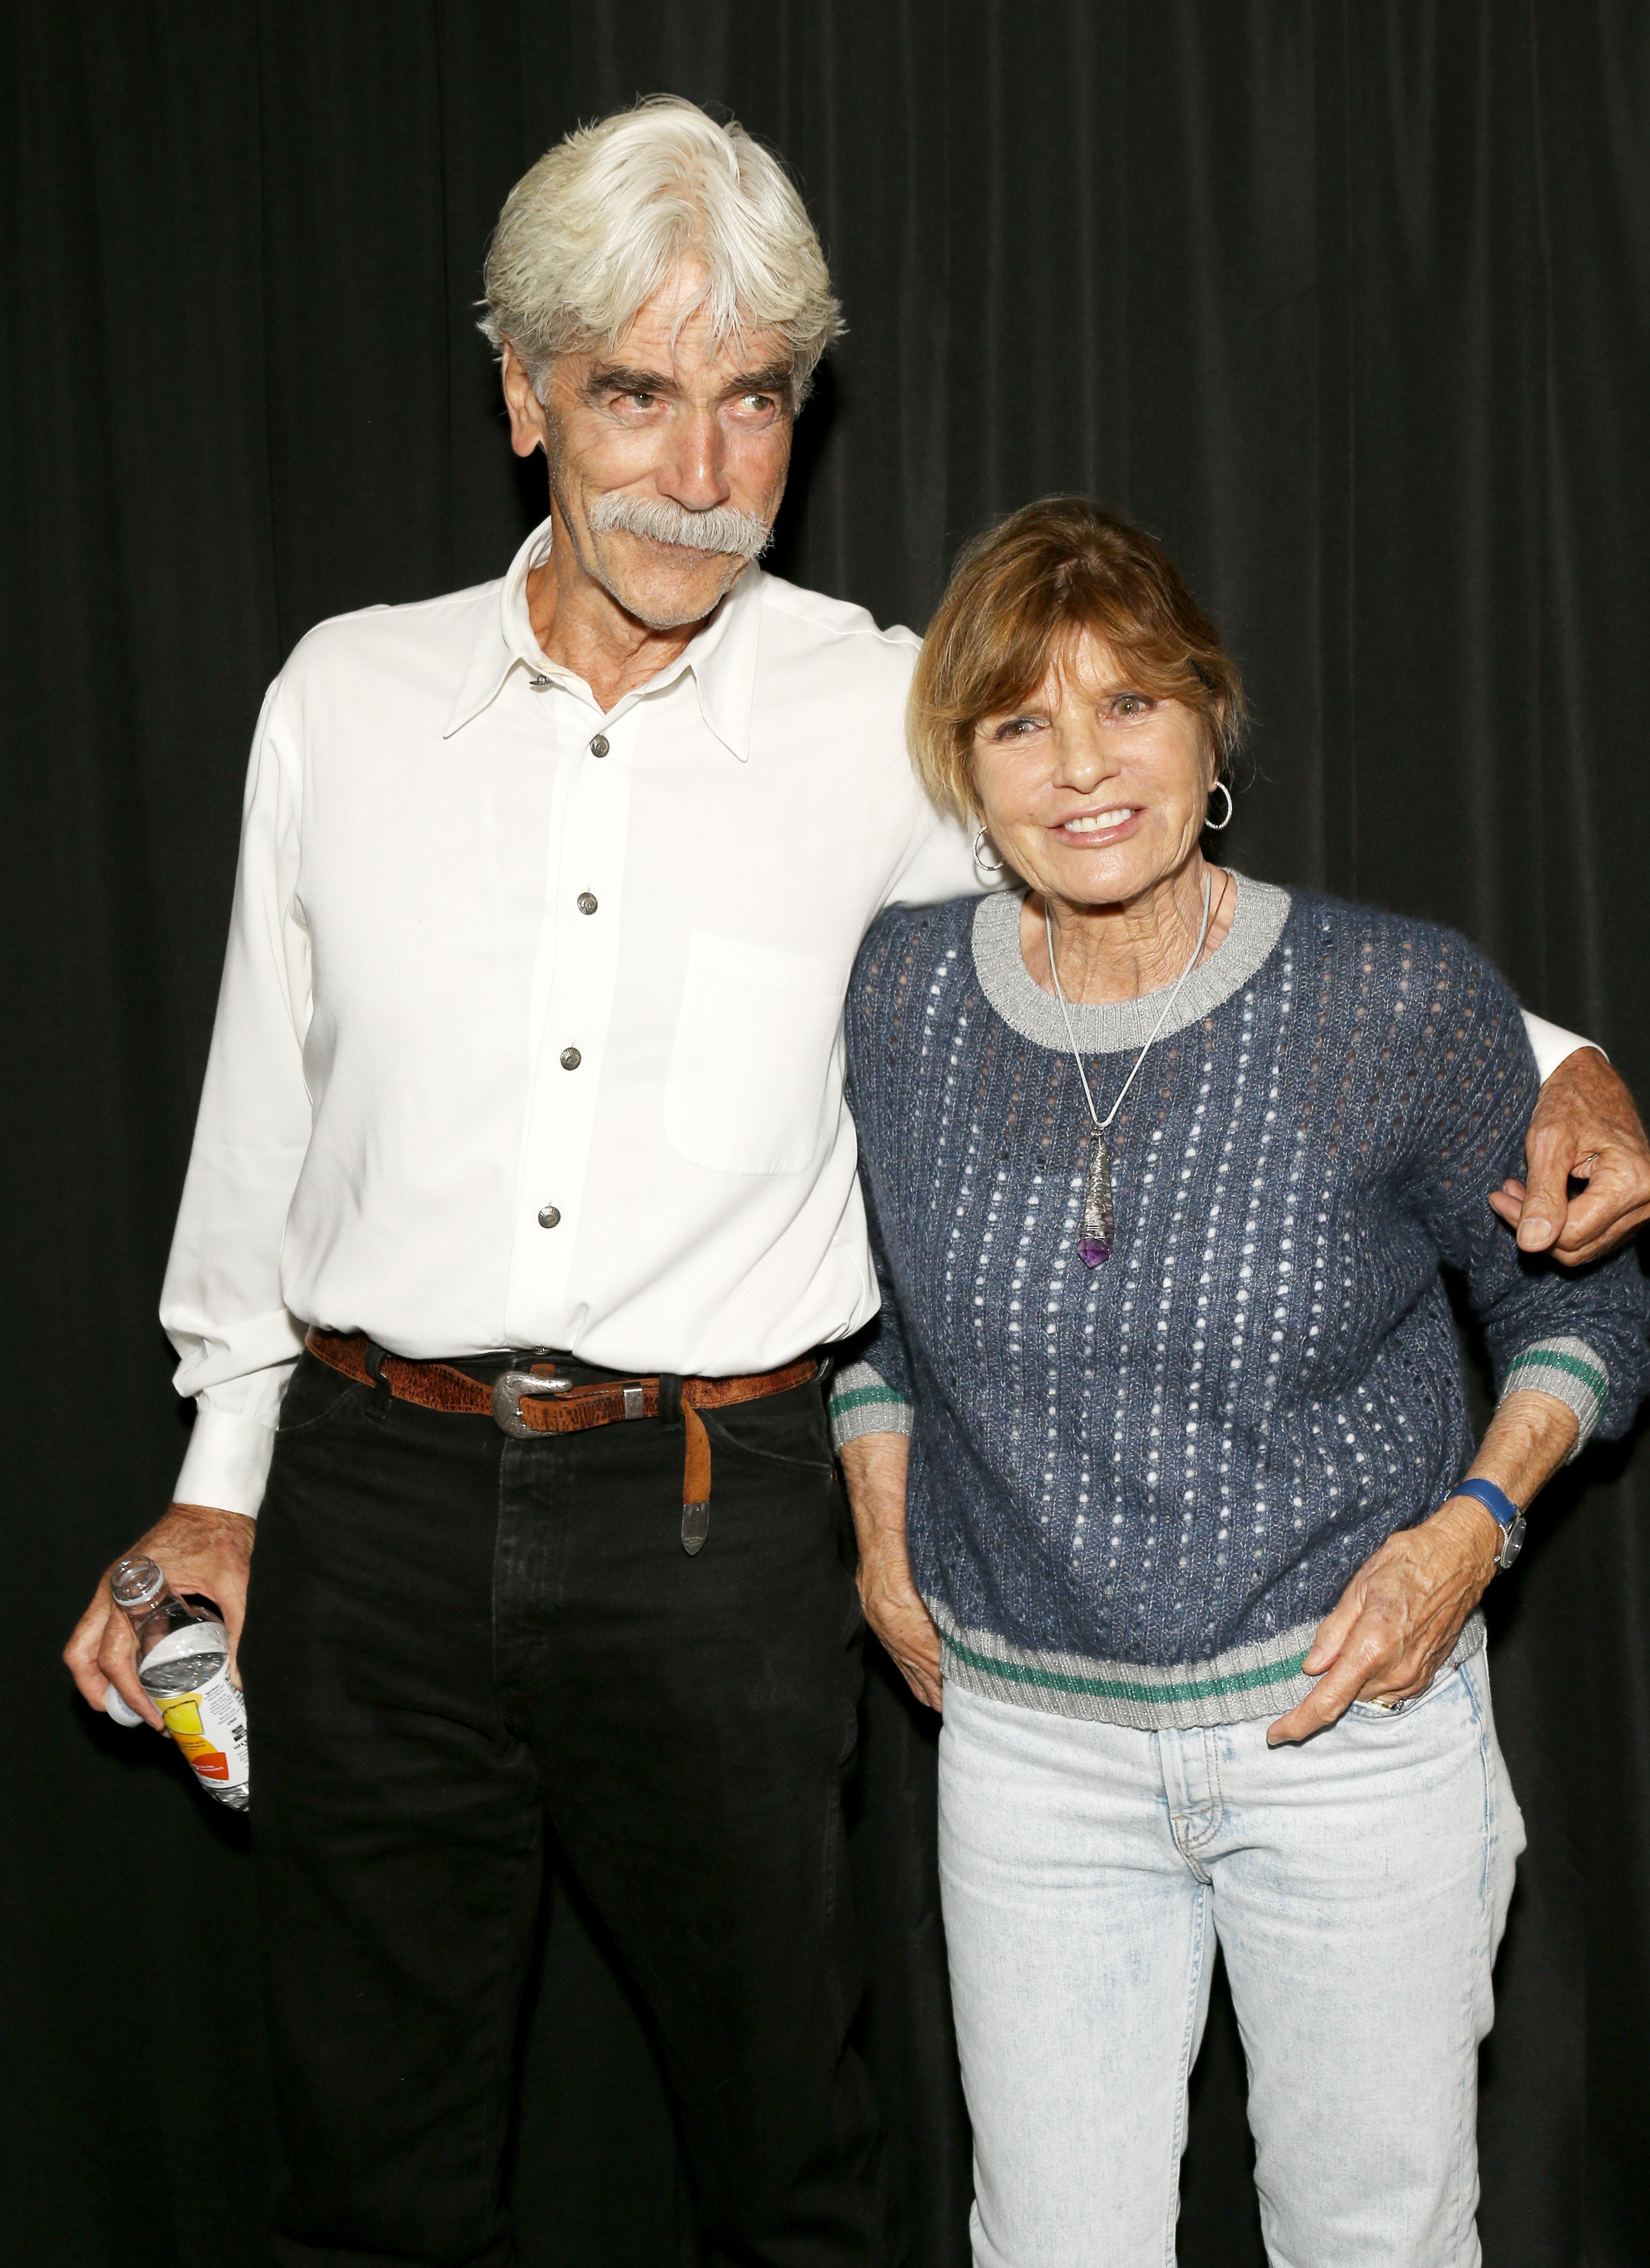 Sam Elliott and Katharine Ross at documentary premiere of "The Chainsaw Artist"  September 14, 2019, in Hollywood, California | Source: Getty Images